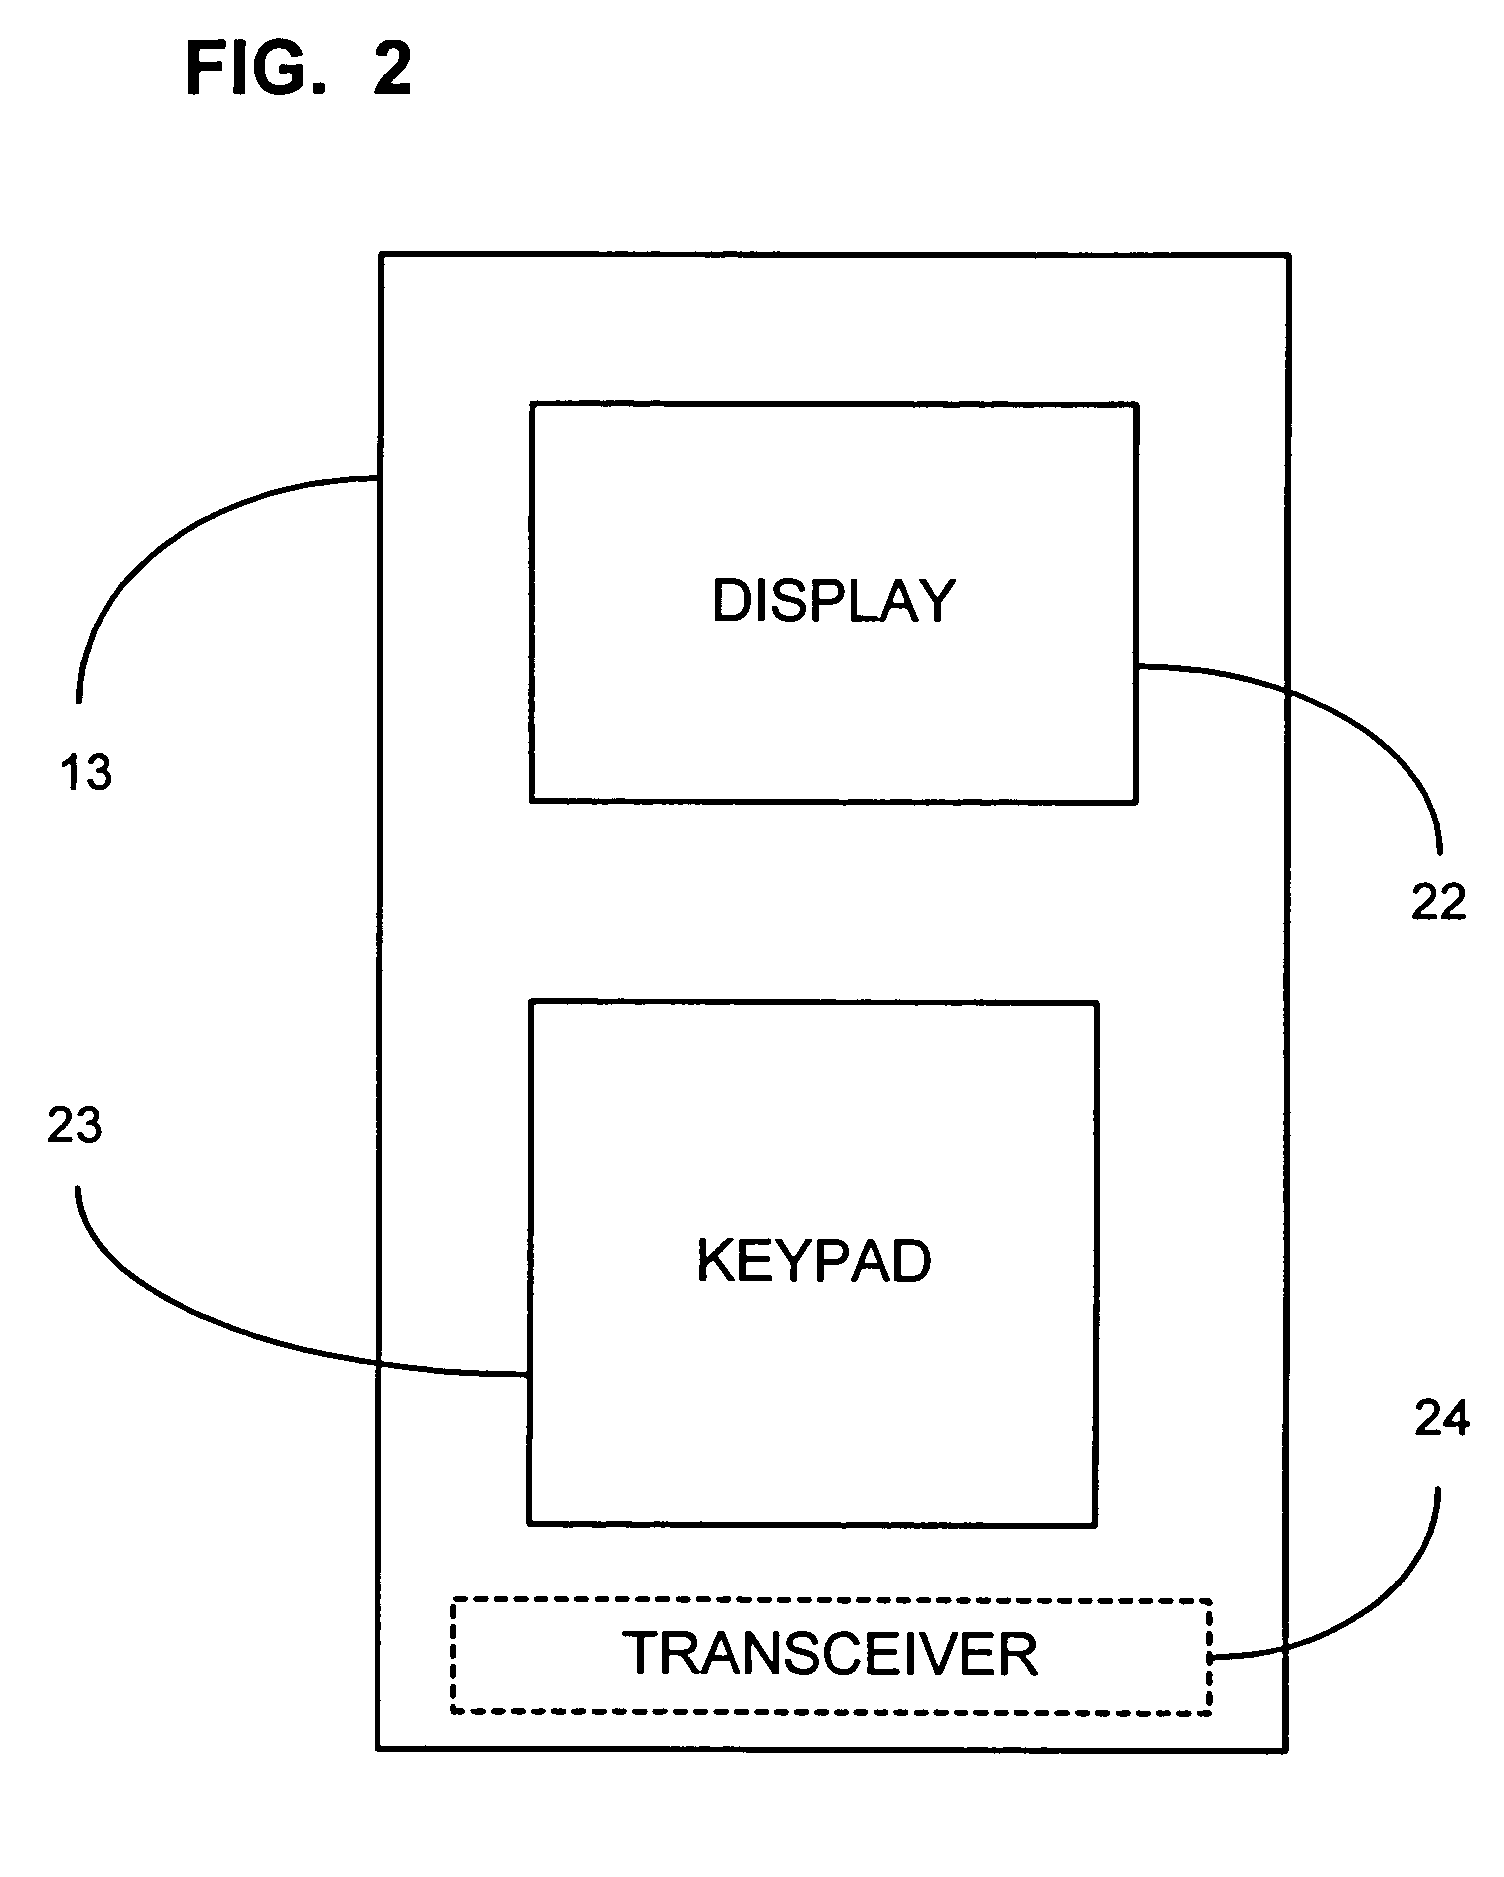 Method and system for employing a first device to direct a networked audio device to obtain a media item